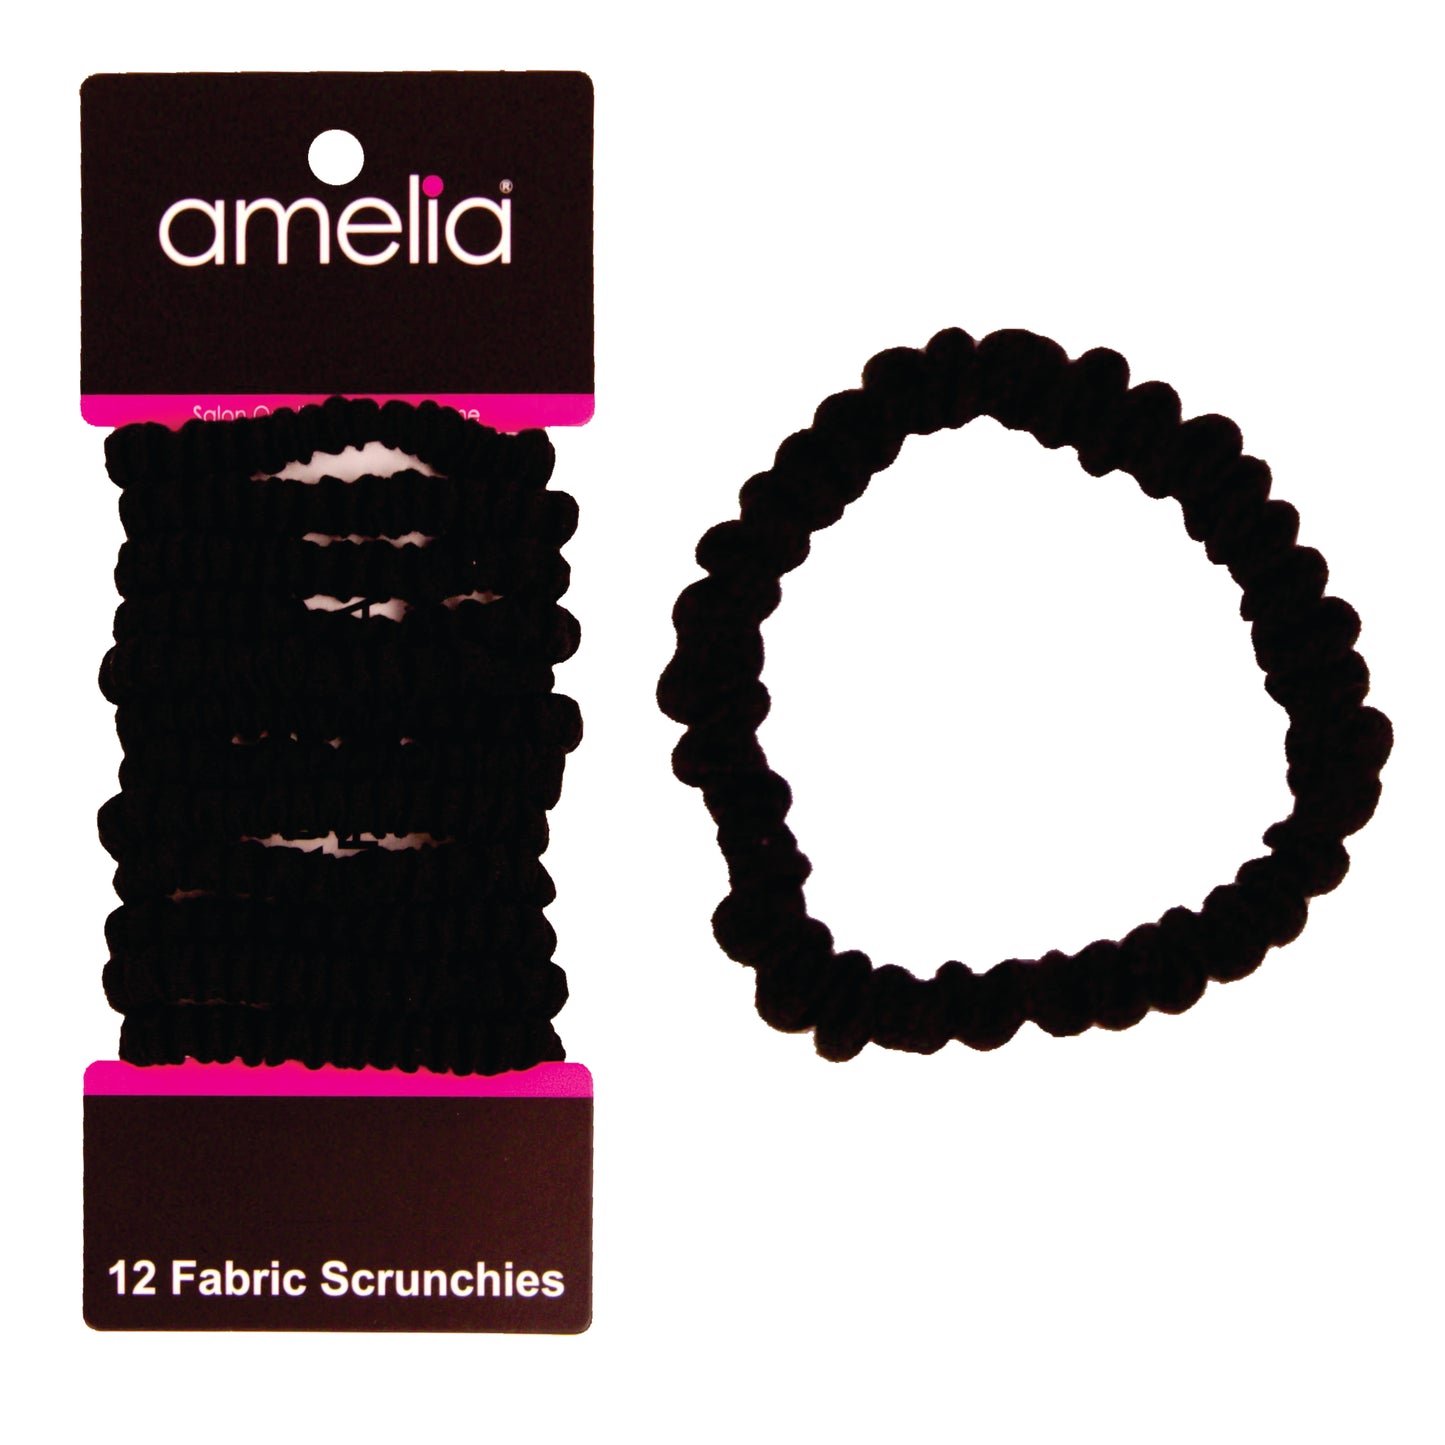 Amelia Beauty, Black Skinny Jersey Scrunchies, 2.125in Diameter, Gentle on Hair, Strong Hold, No Snag, No Dents or Creases. 12 Pack